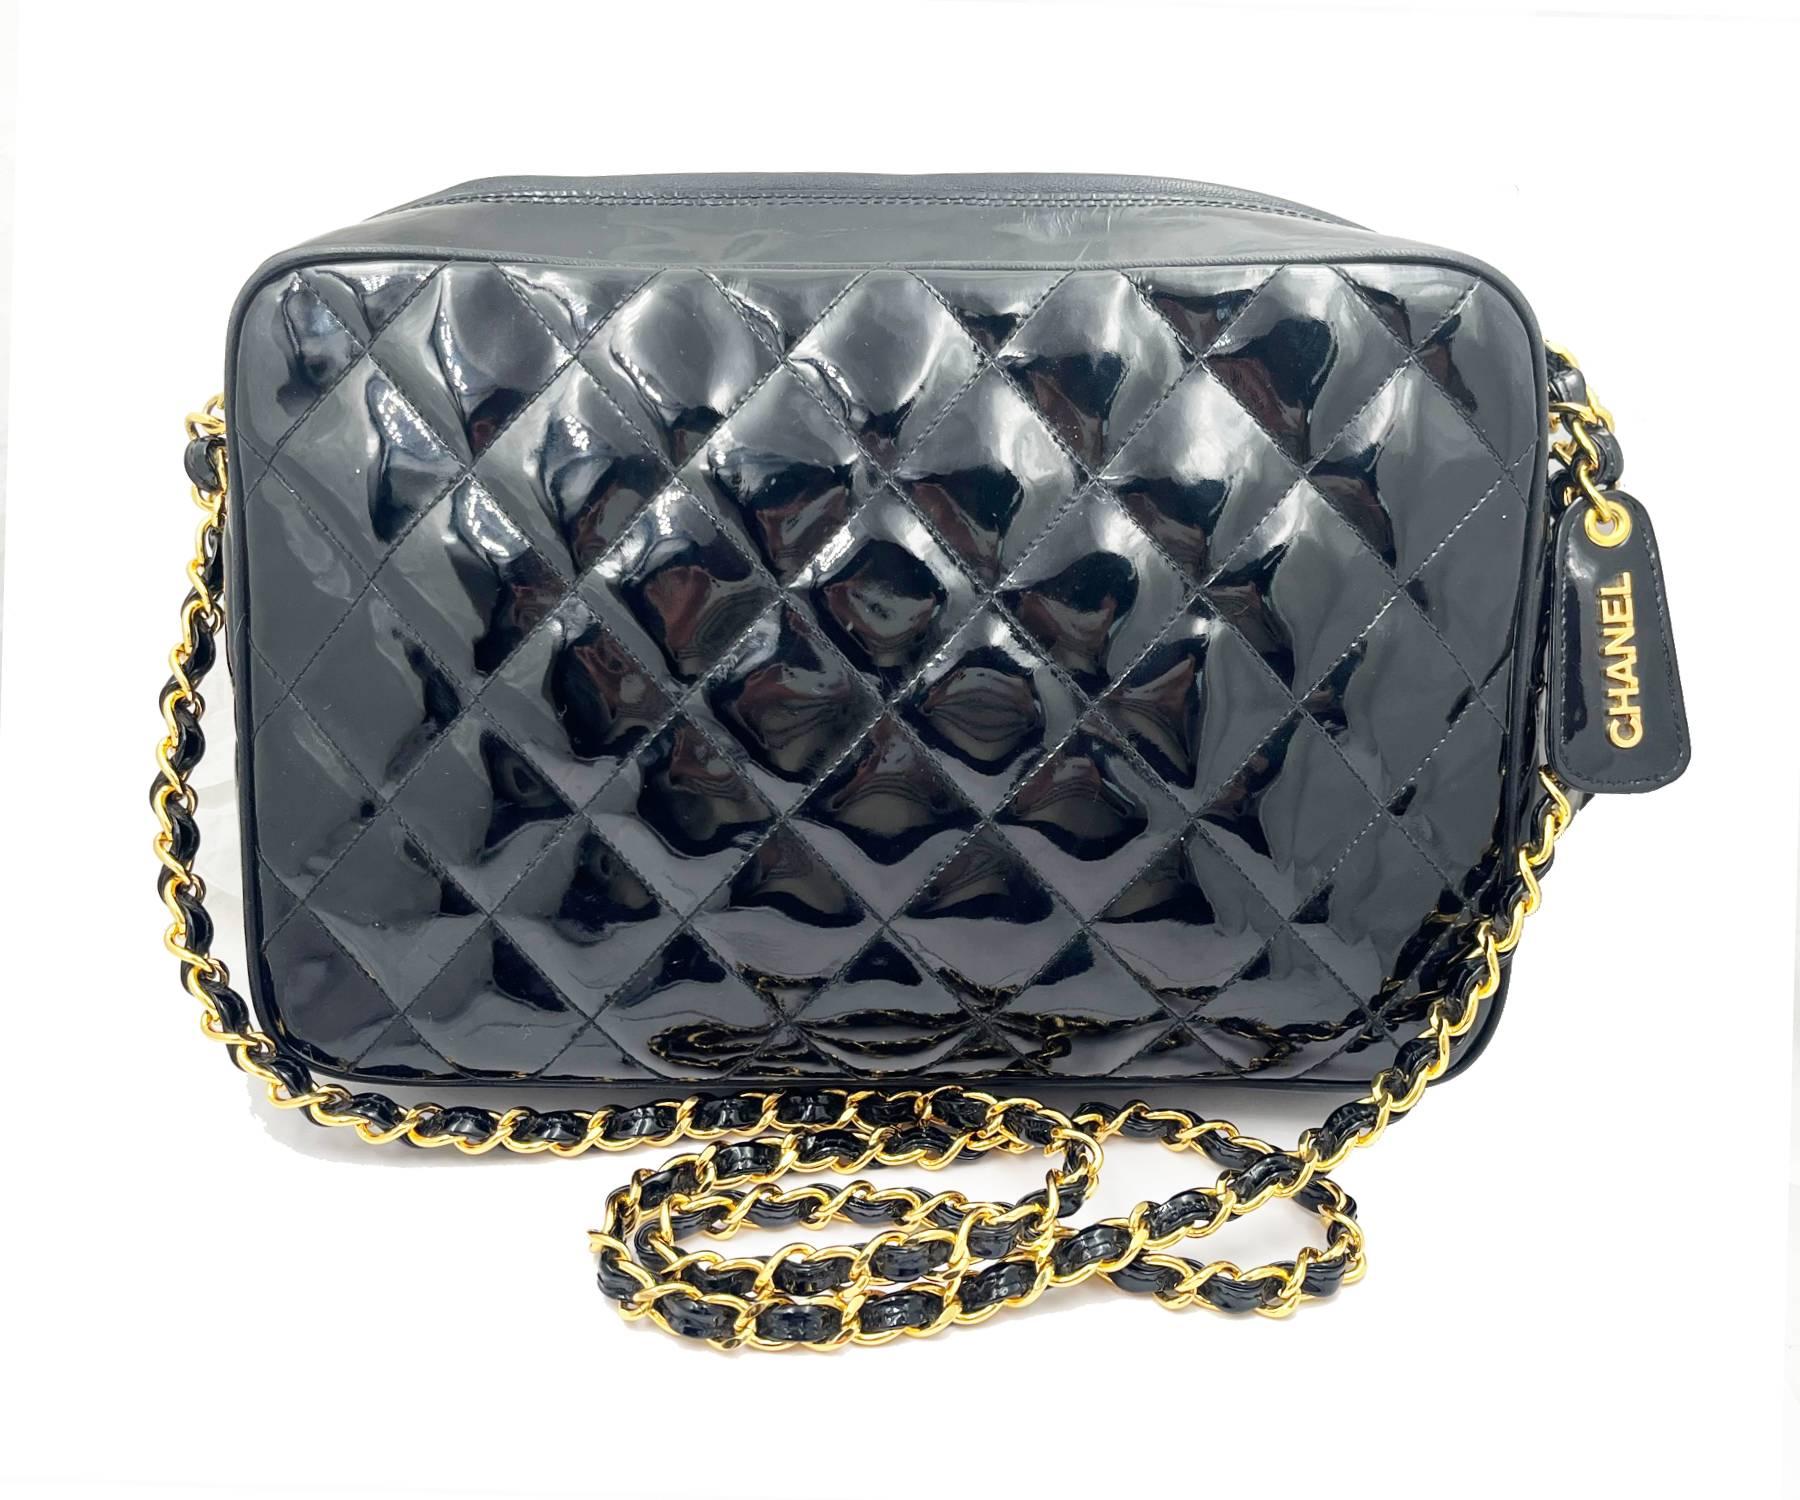 Chanel Vintage Black Patent Leather Large Camera Cross Body Bag

*385 XXXX
*Made in Italy
*Comes with the original box and booklet
*24K gold plated hardware

-It is approximately 10″ x 6.75″ x 2.75″.
-The chain is approximately 20″ drop.
-It has